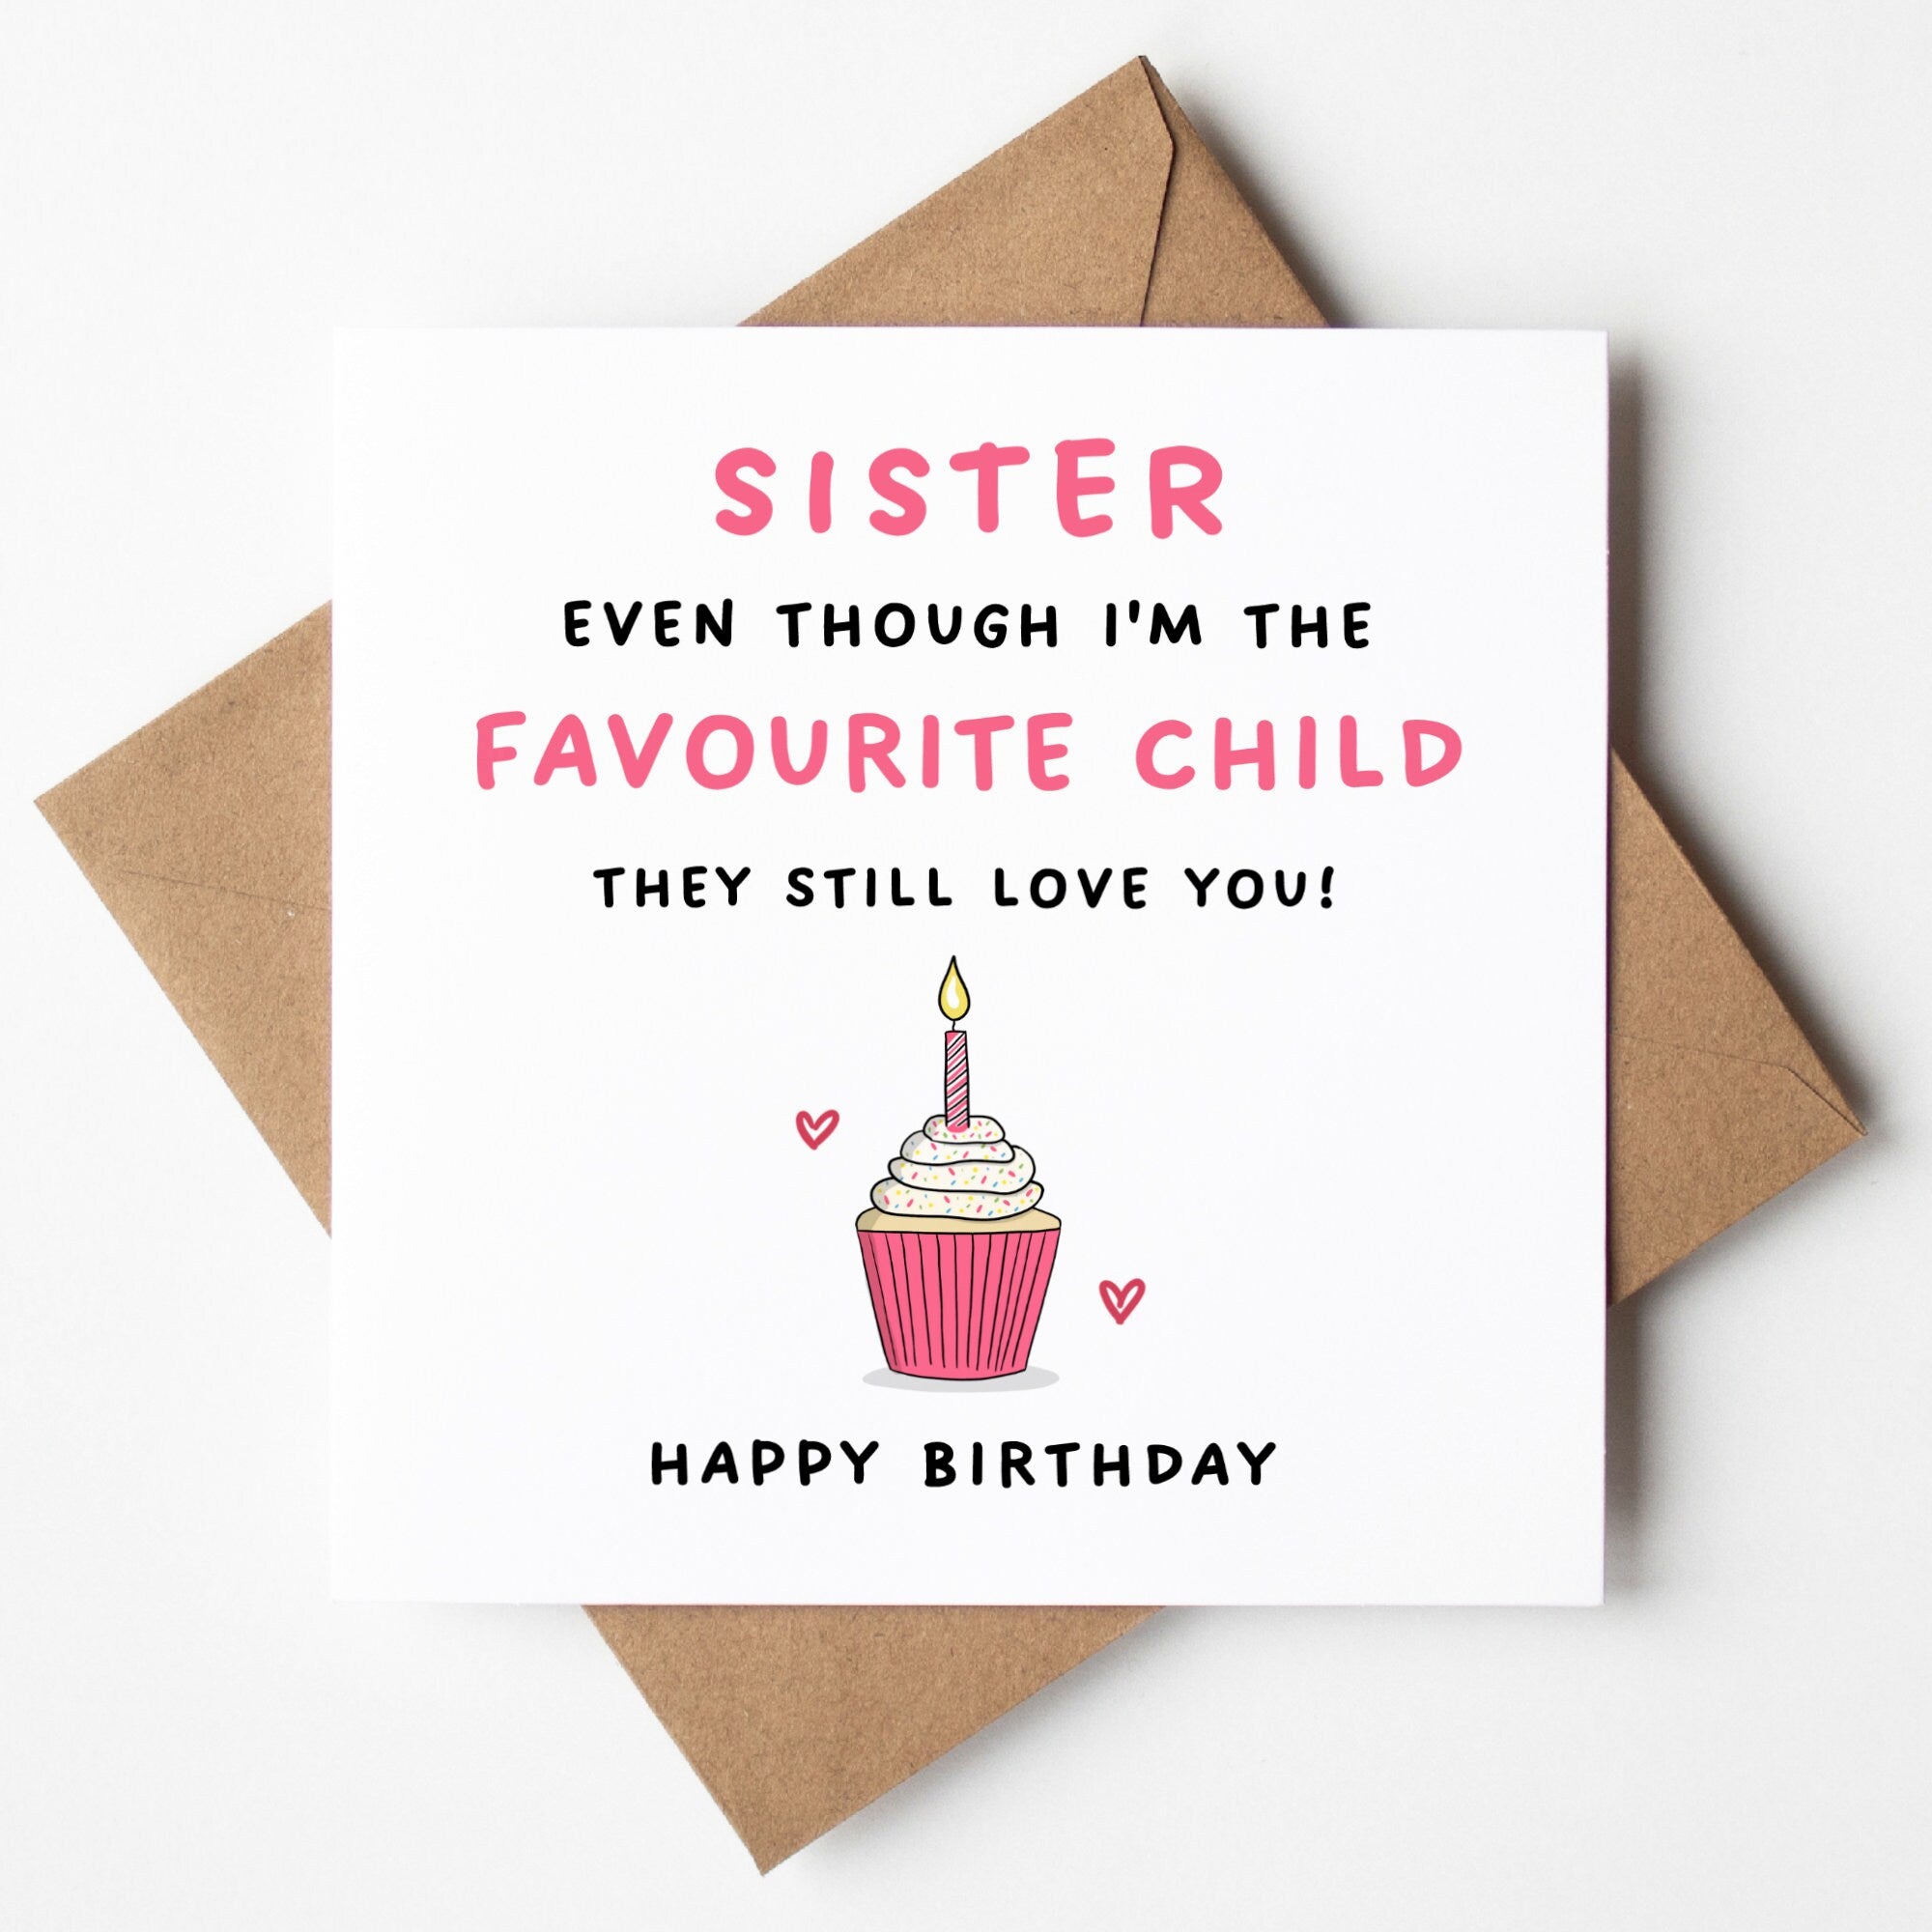 Funny Sister Birthday Card, Sister Even Though I'm The Favourite Child They Still Love You, Funny Birthday Card, For Sister, Cheeky, Banter